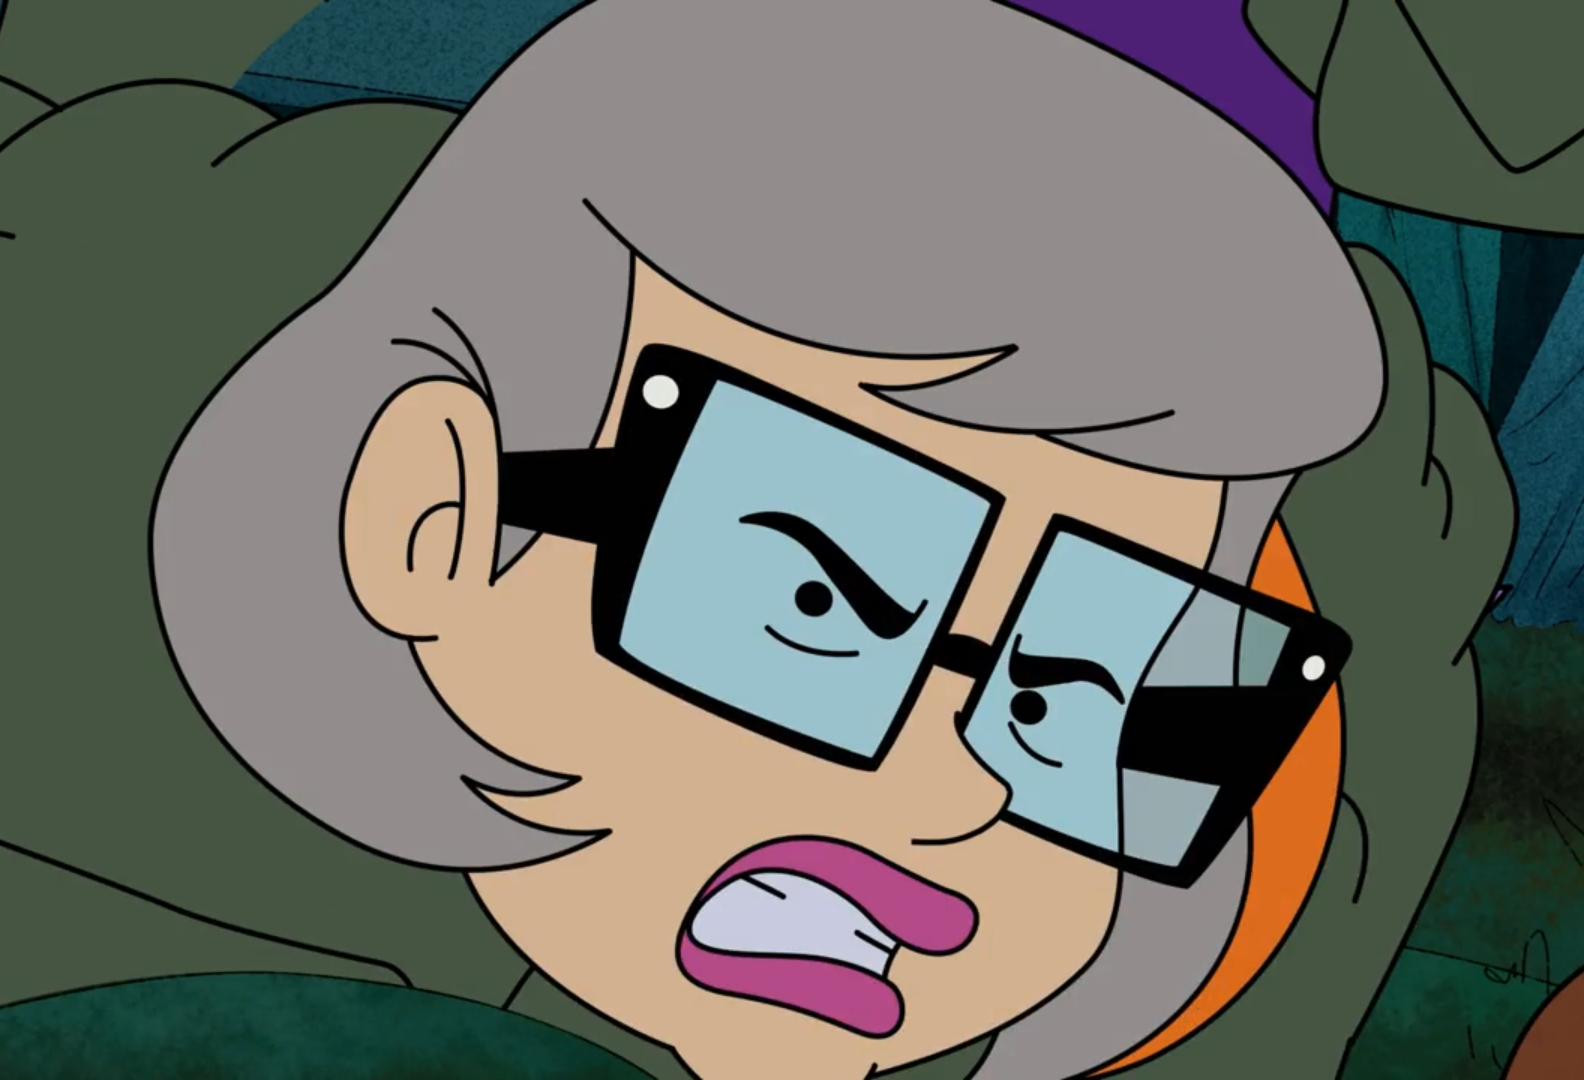 Be Cool, Scooby-Doo!, Angry Velma